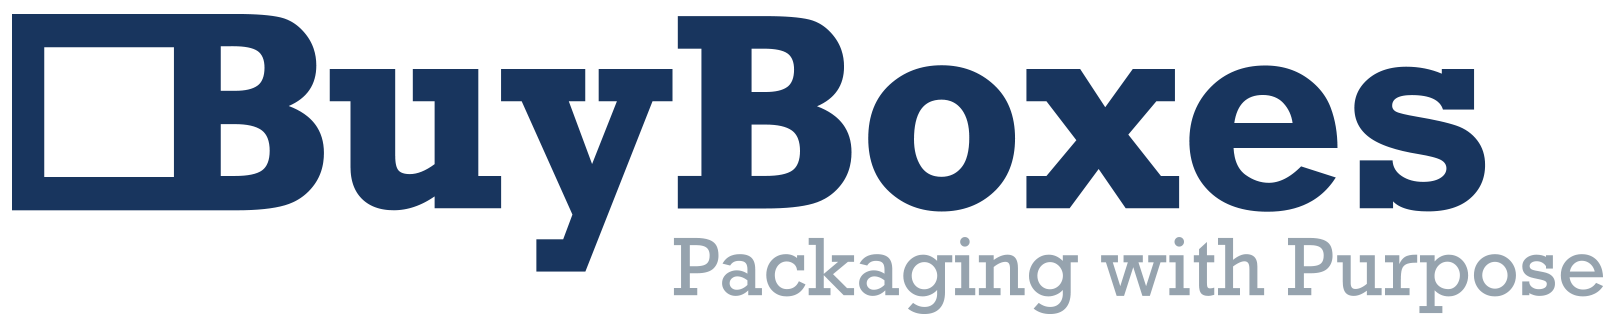 blue Buyboxes logo with grey tag line underneath